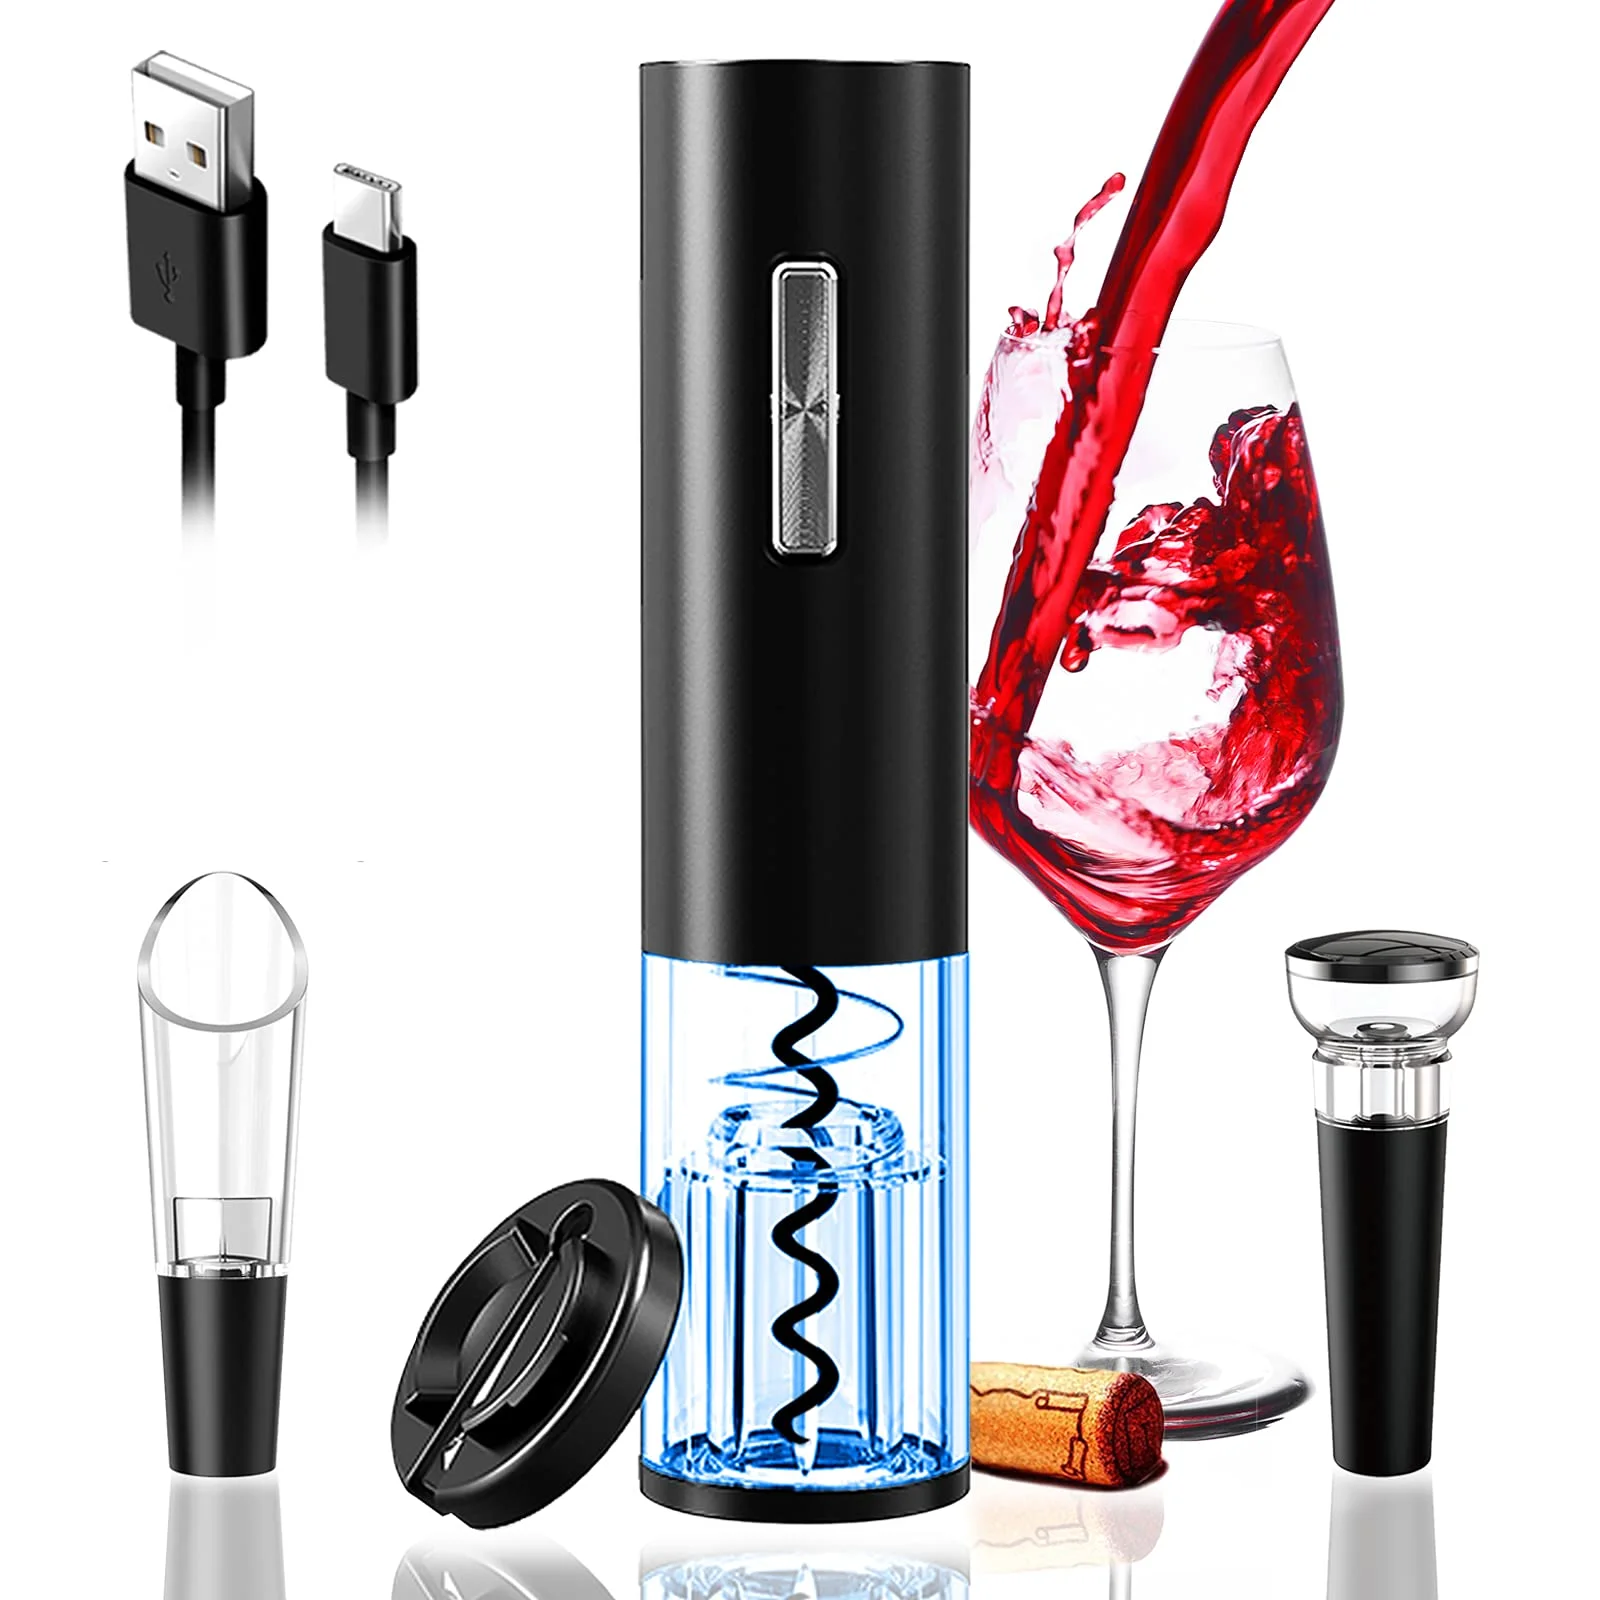 Portable Wine Screw Stainless Steel Automatic Corkscrew Opener Operated 2 way with Rechargeable Cordless or 4AA Battery Electric Wine Opener with Foil Cutter Grey 